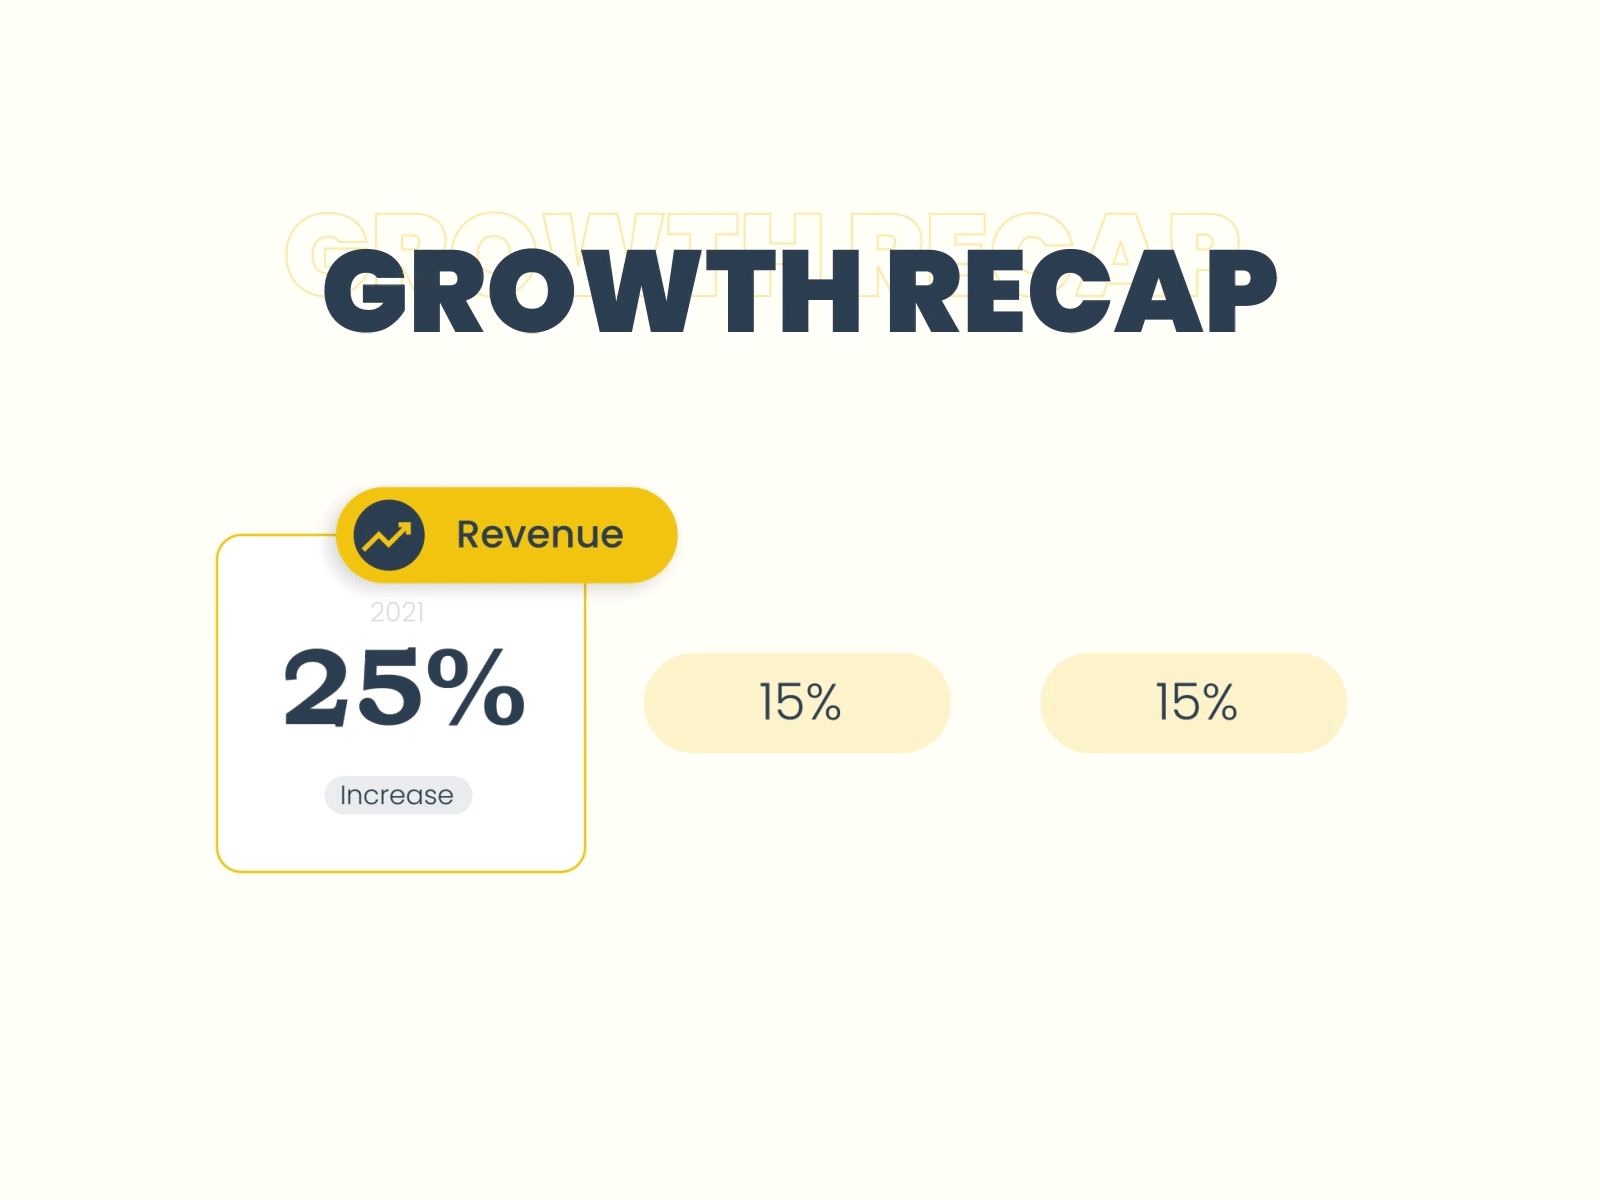 Growth Recap - 2D Animated GIF [ Motion Graphic] adobe after effects adobe illustrator after effects animation branding creative design financial flat growth minimal motion graphics